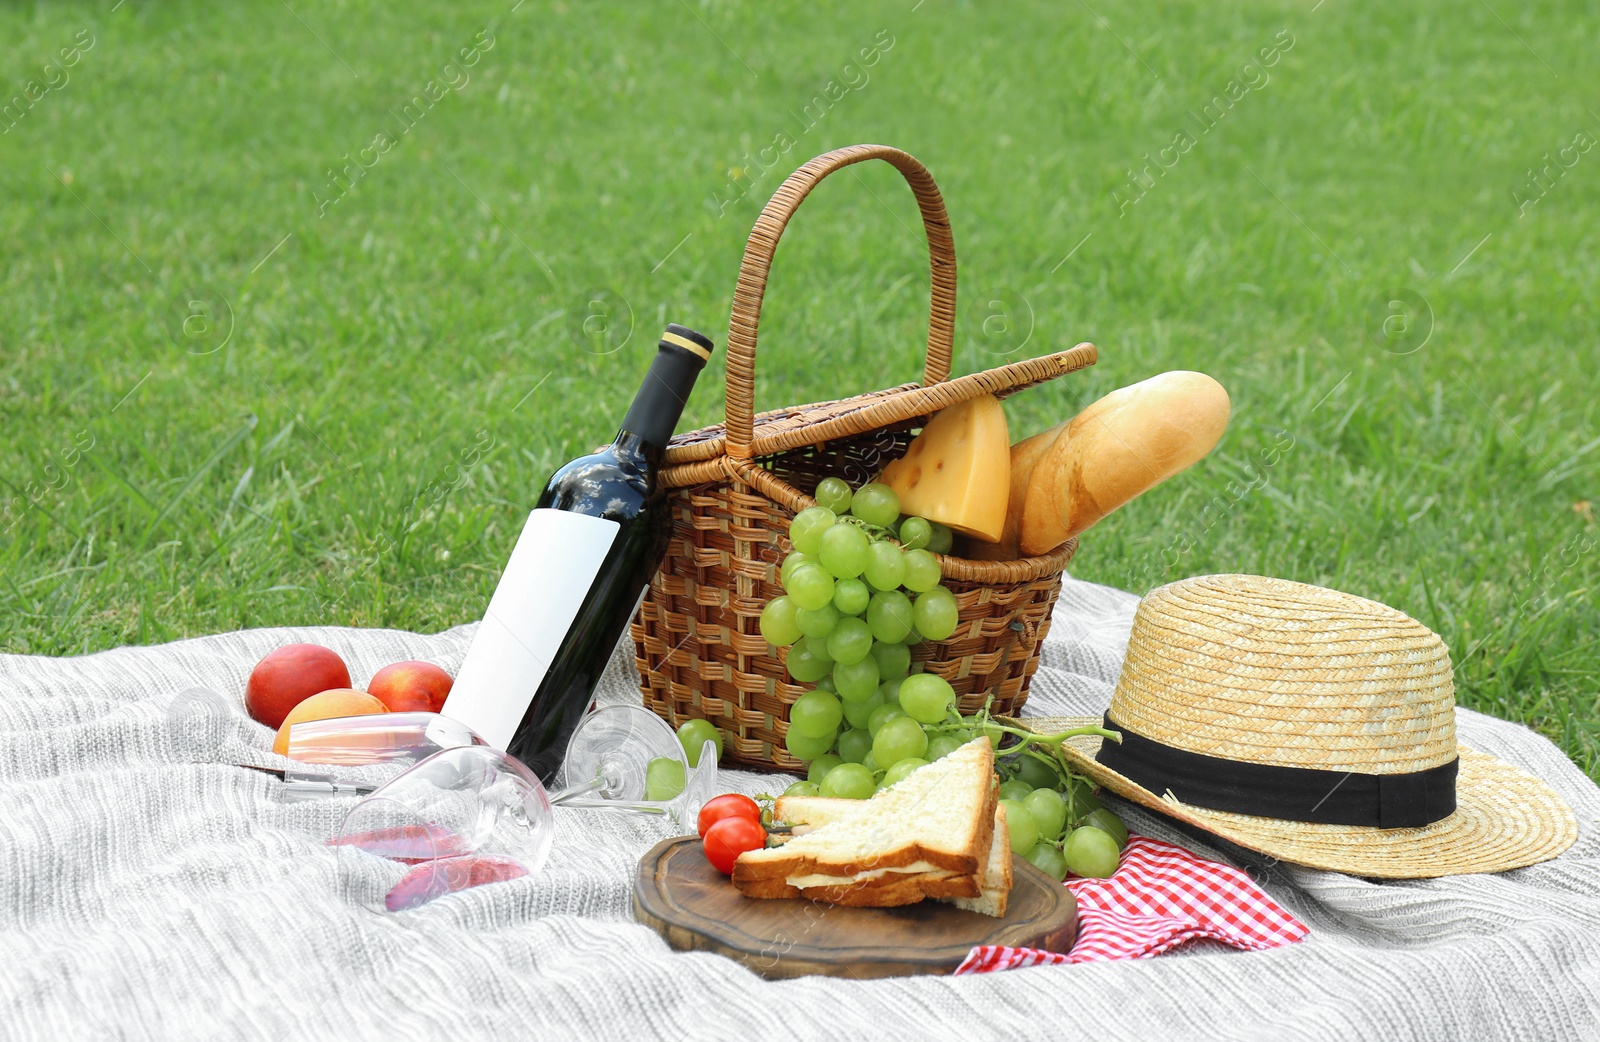 Photo of Basket with food and straw hat on blanket in park. Summer picnic